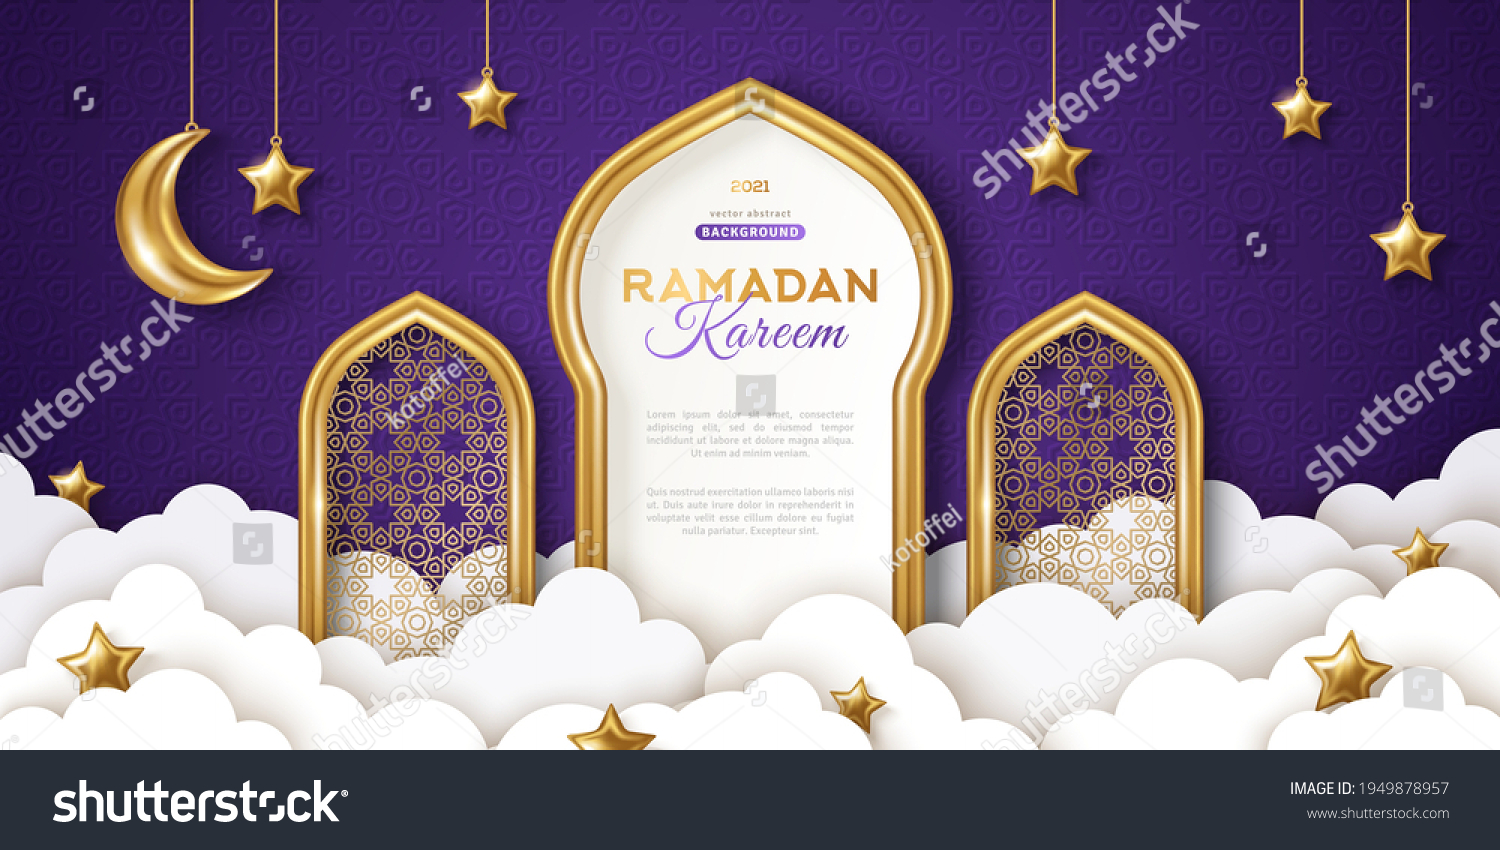 Ramadan Kareem concept banner, gold 3d frame arab window on night sky background, beautiful arabesque pattern. Vector illustration. Hanging golden crescent and stars, paper cut clouds. Place for text #1949878957